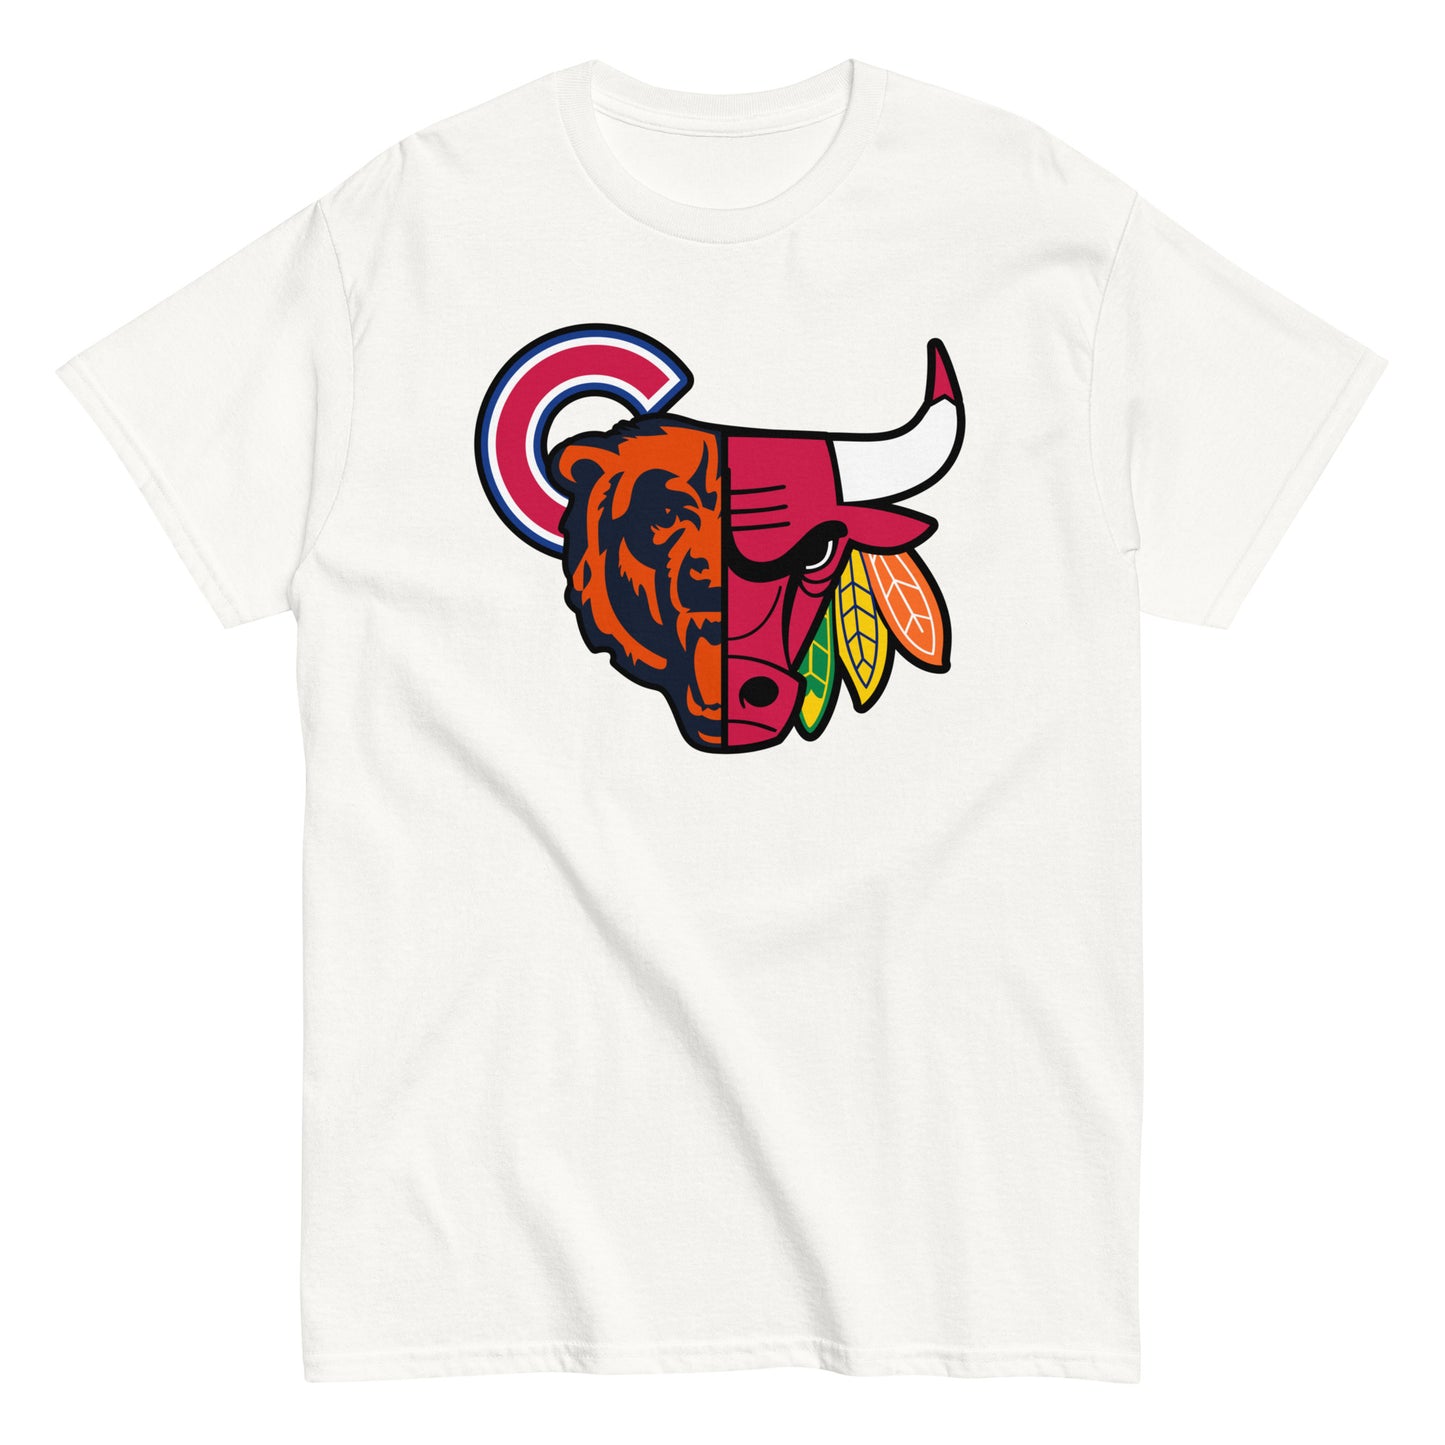 CHI (Cubs) Tee - Full Color